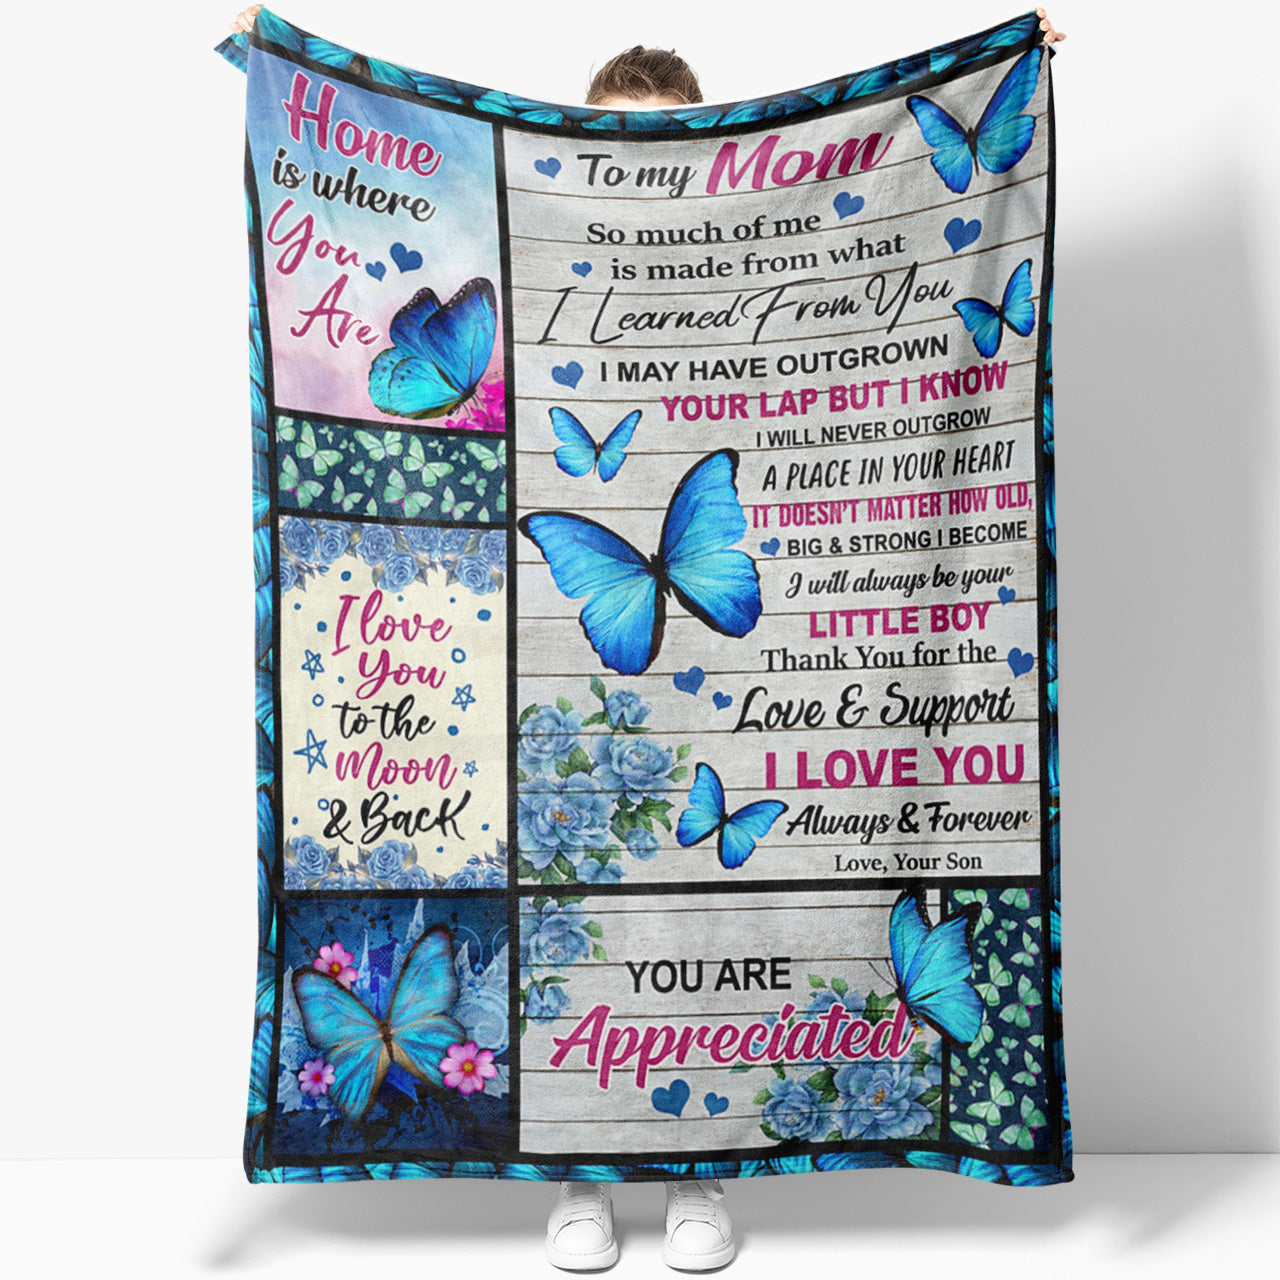 Blanket Gift Ideas For Mom, Mothers Day Gift Ideas, Home is Where You Are